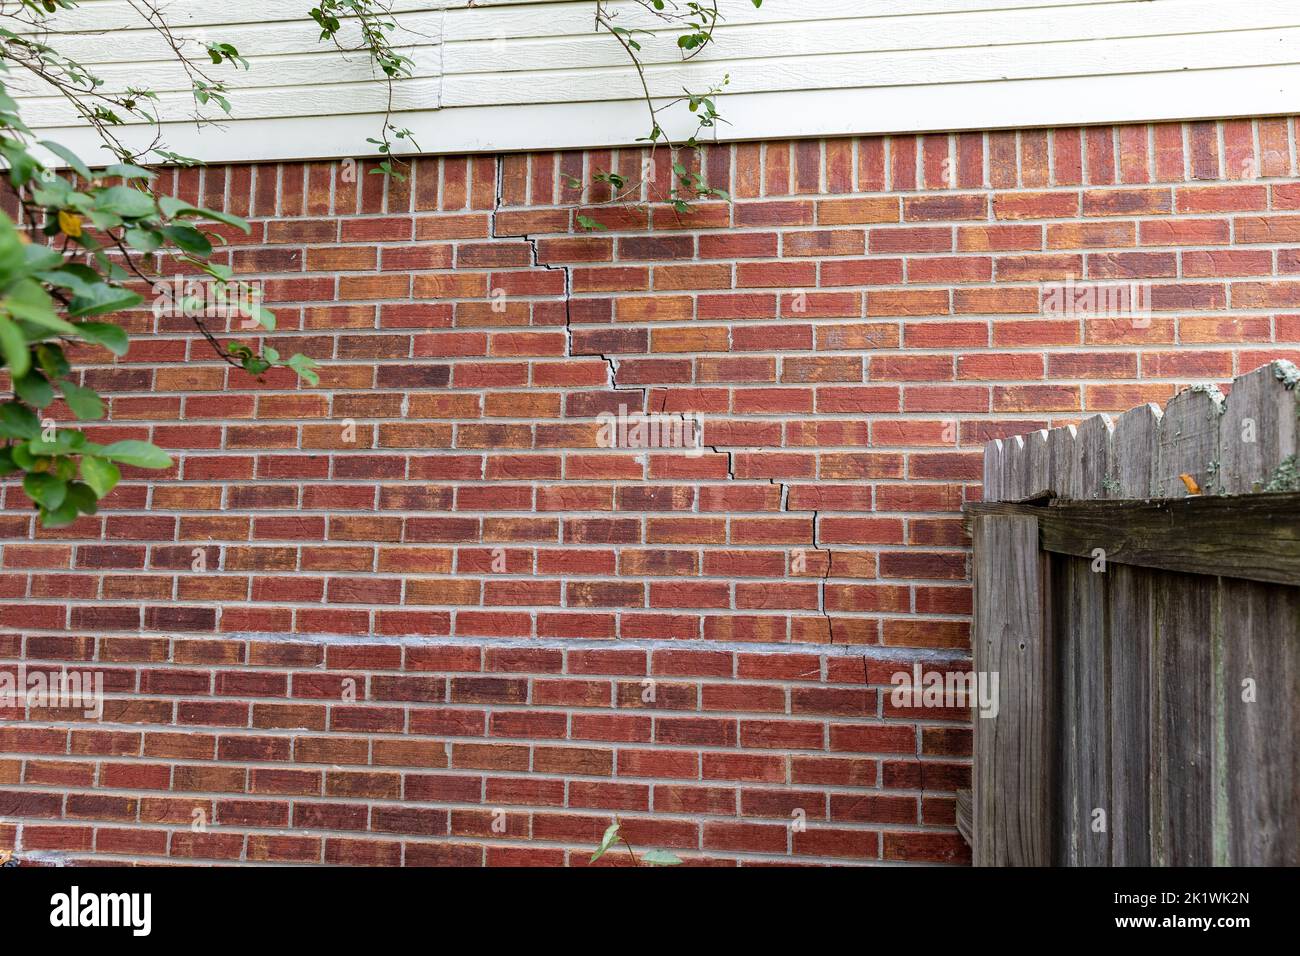 Crack in bricks of home from foundation problems Stock Photo